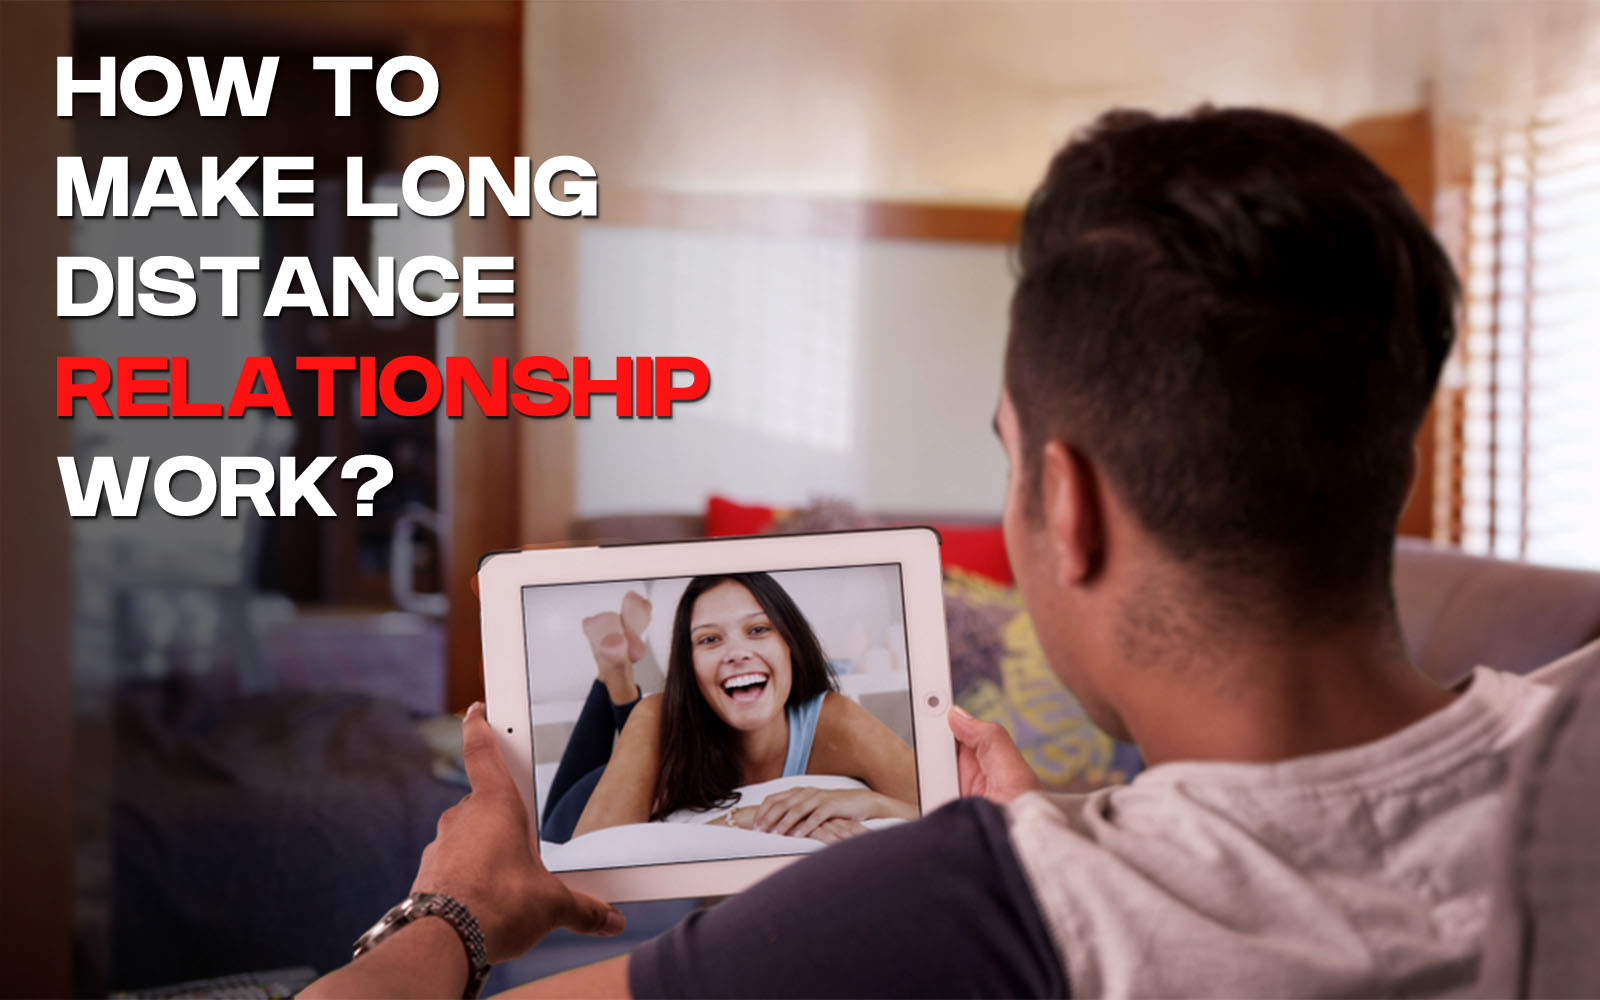 How to Make Long Distance Relationship work?